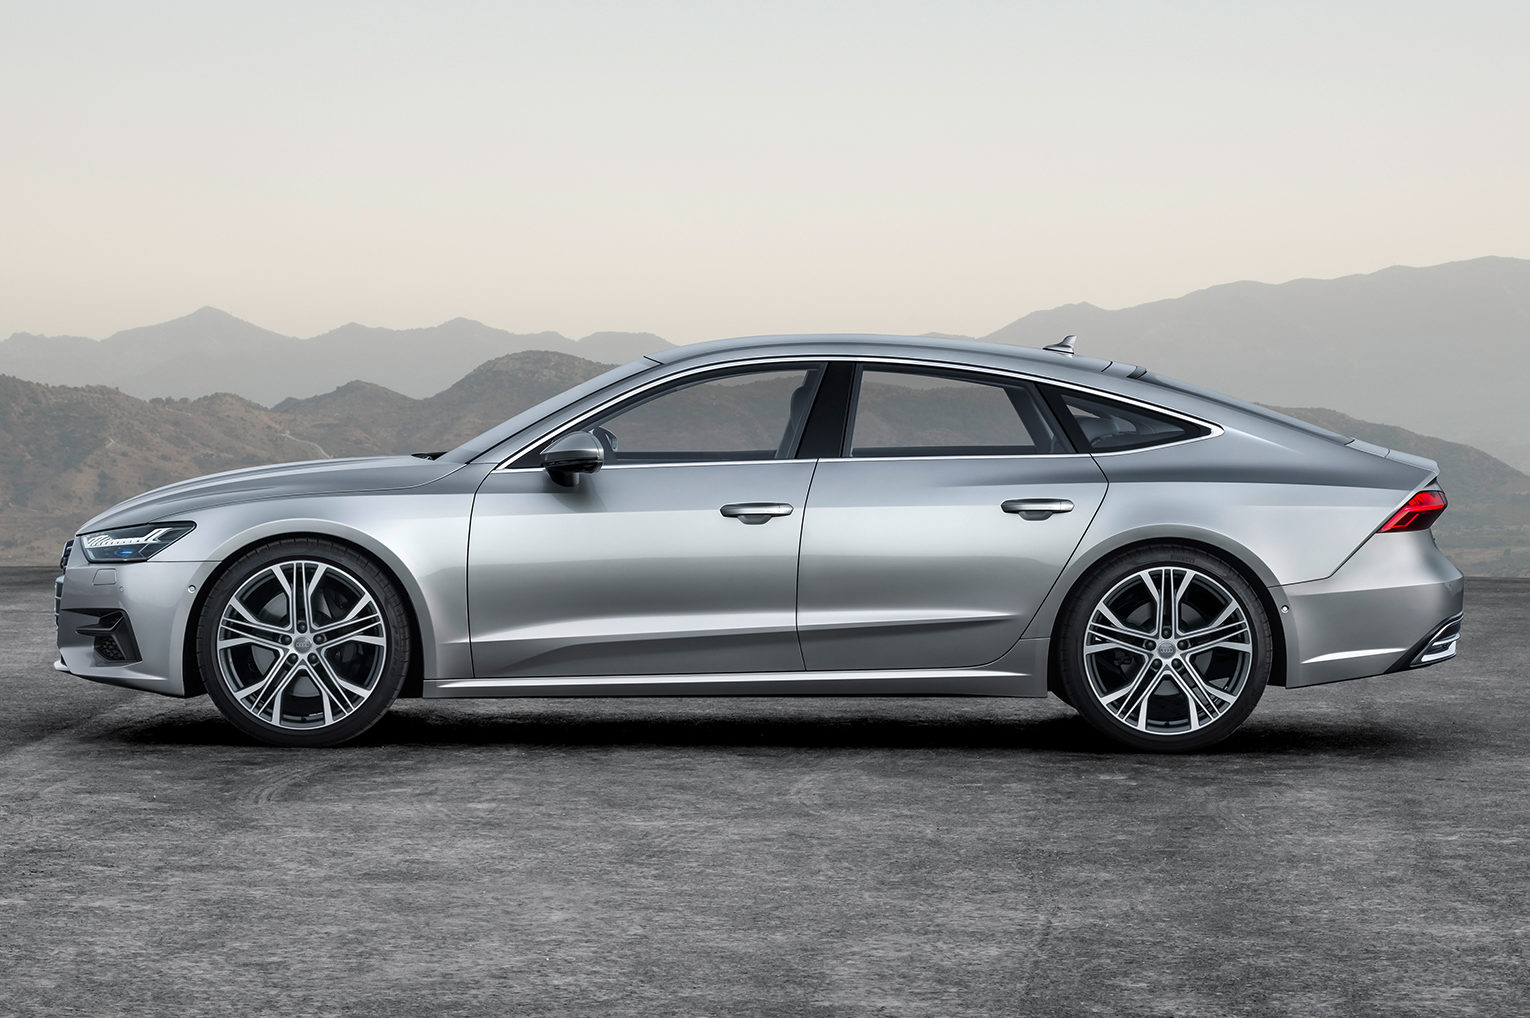 8 Ways the New Audi A7 Looks Better Than the Old One